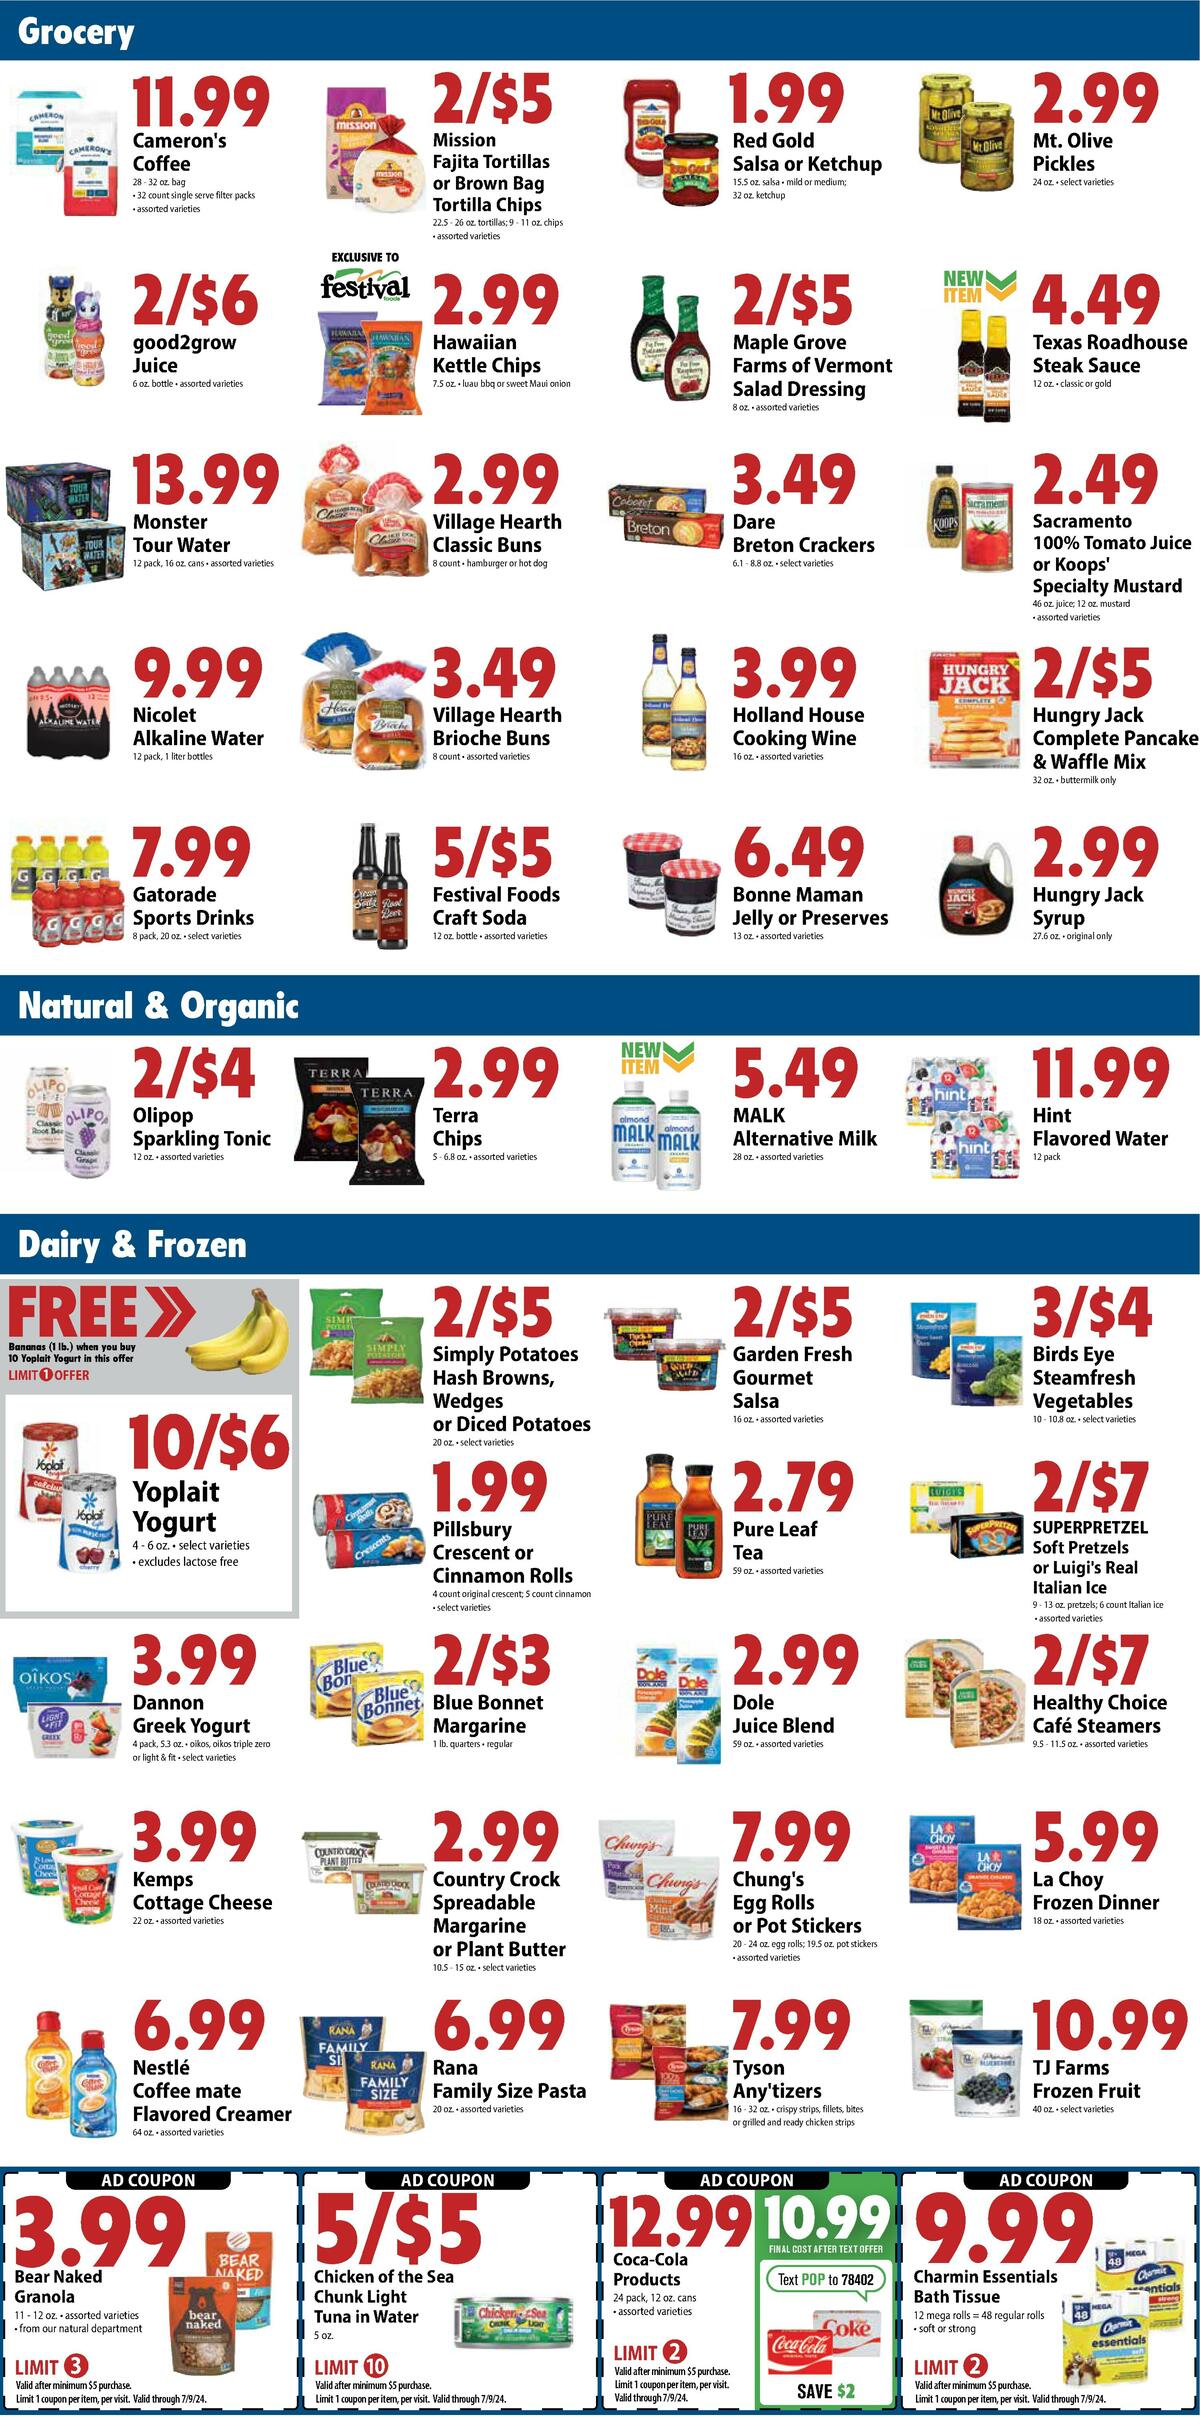 Festival Foods Weekly Ad from July 3